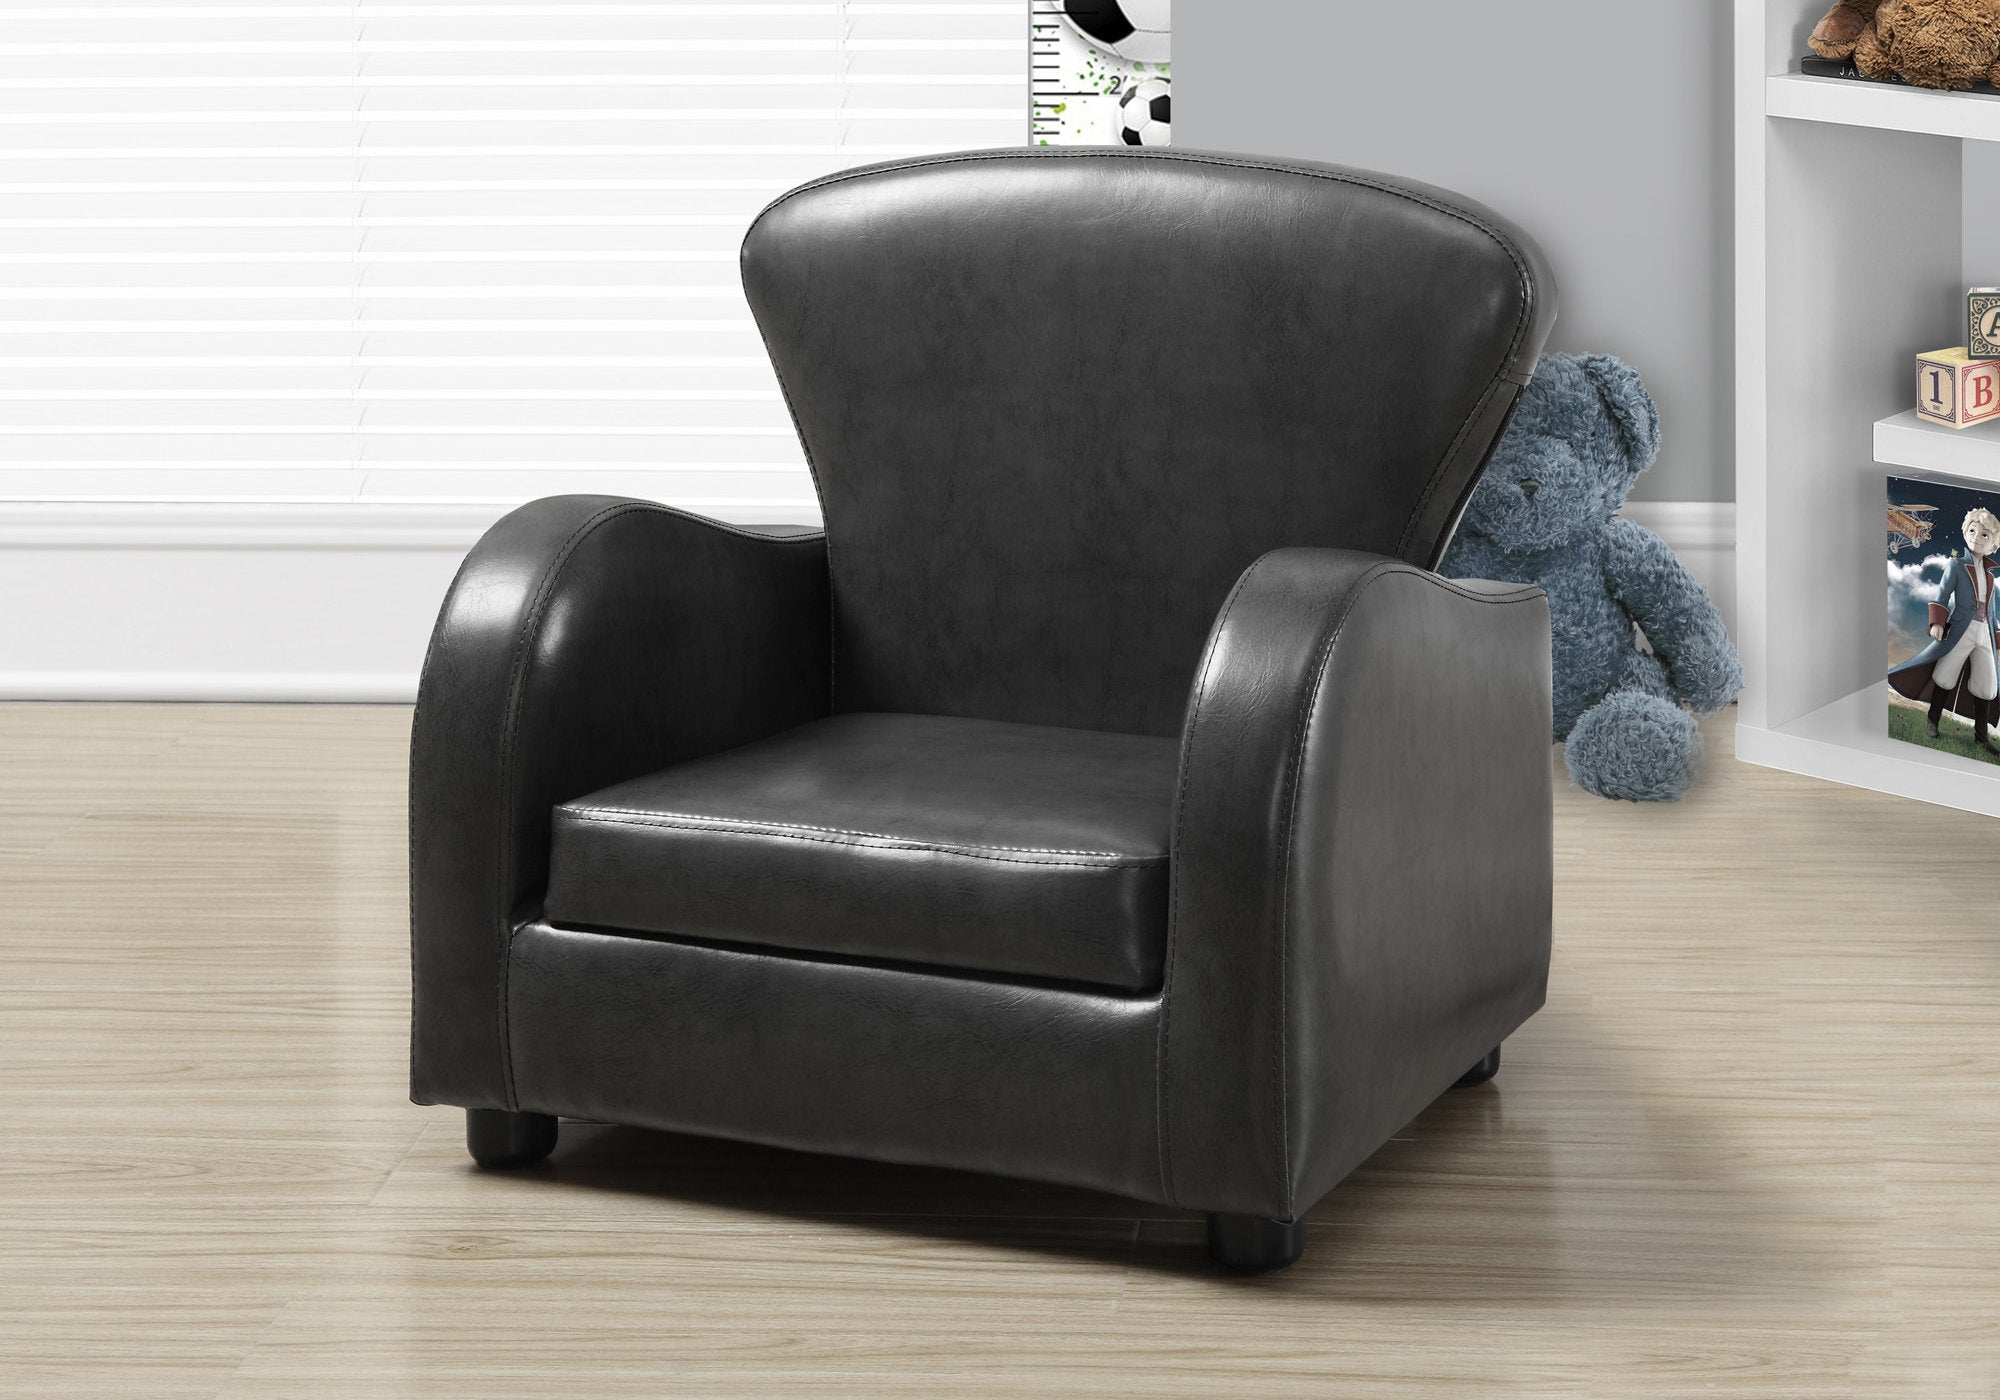 juvenile chair charcoal grey leather look i8141